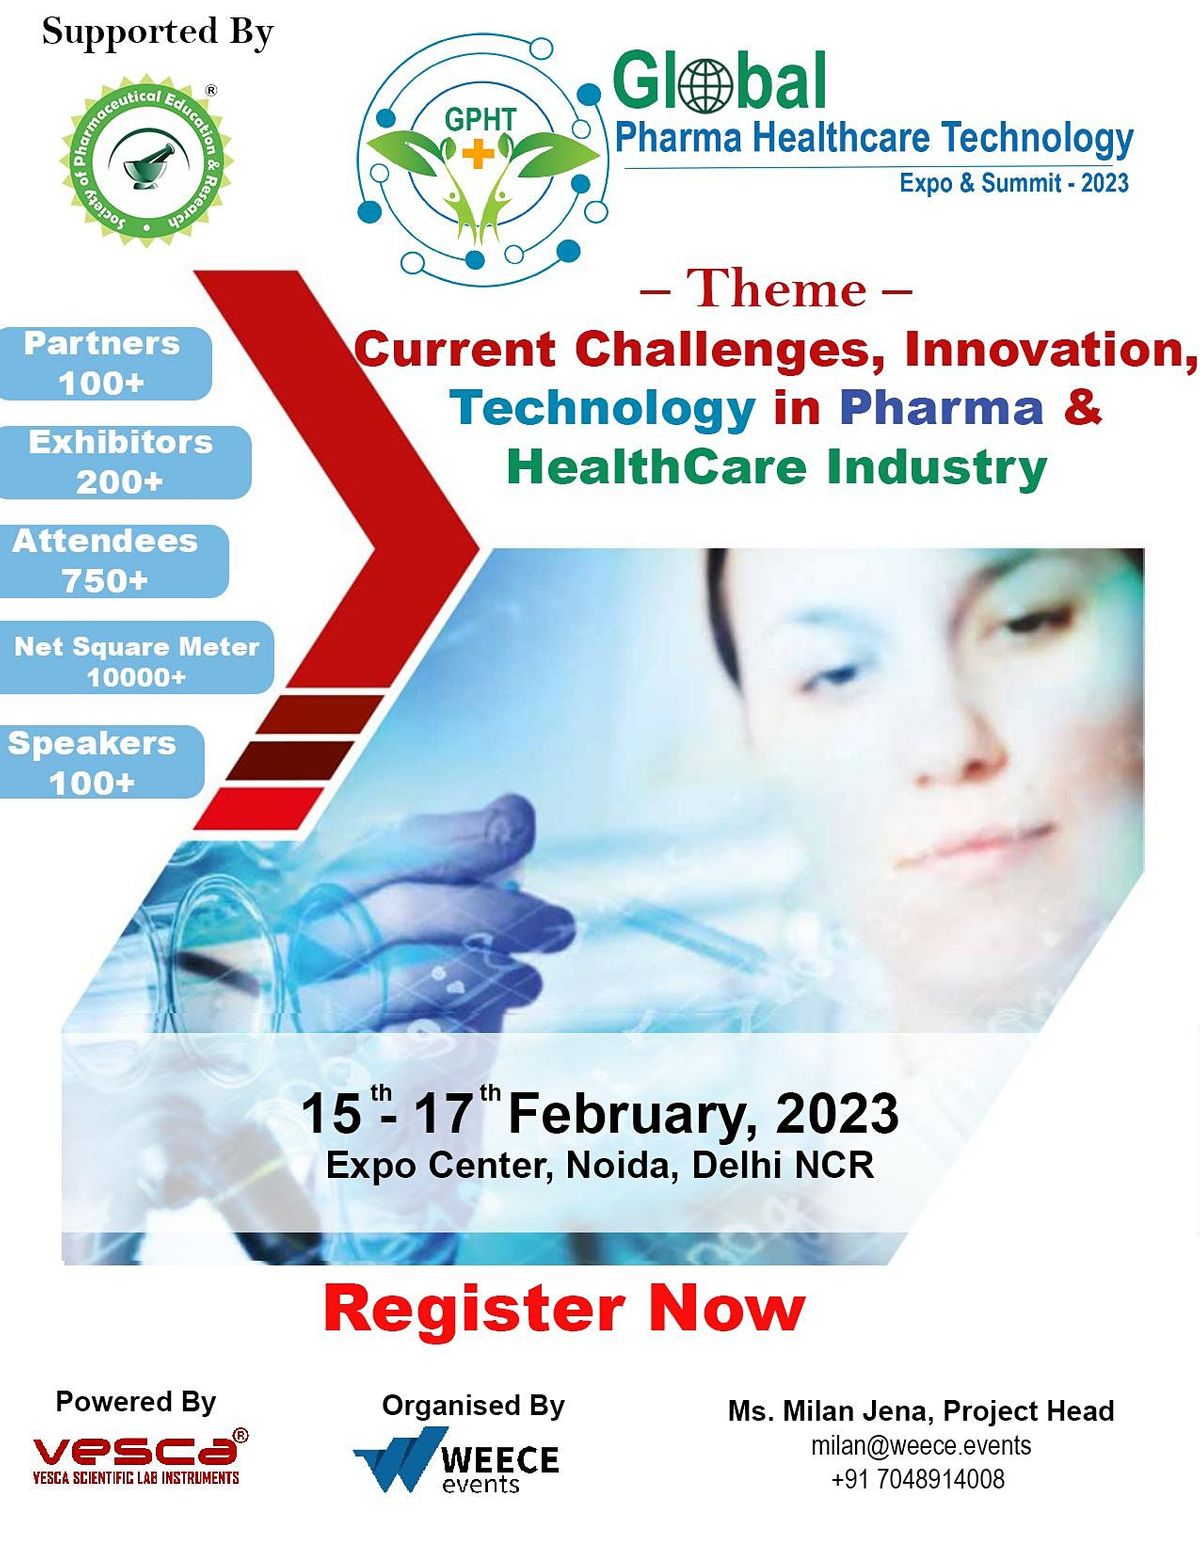 Global PHT Expo & Summit 2023